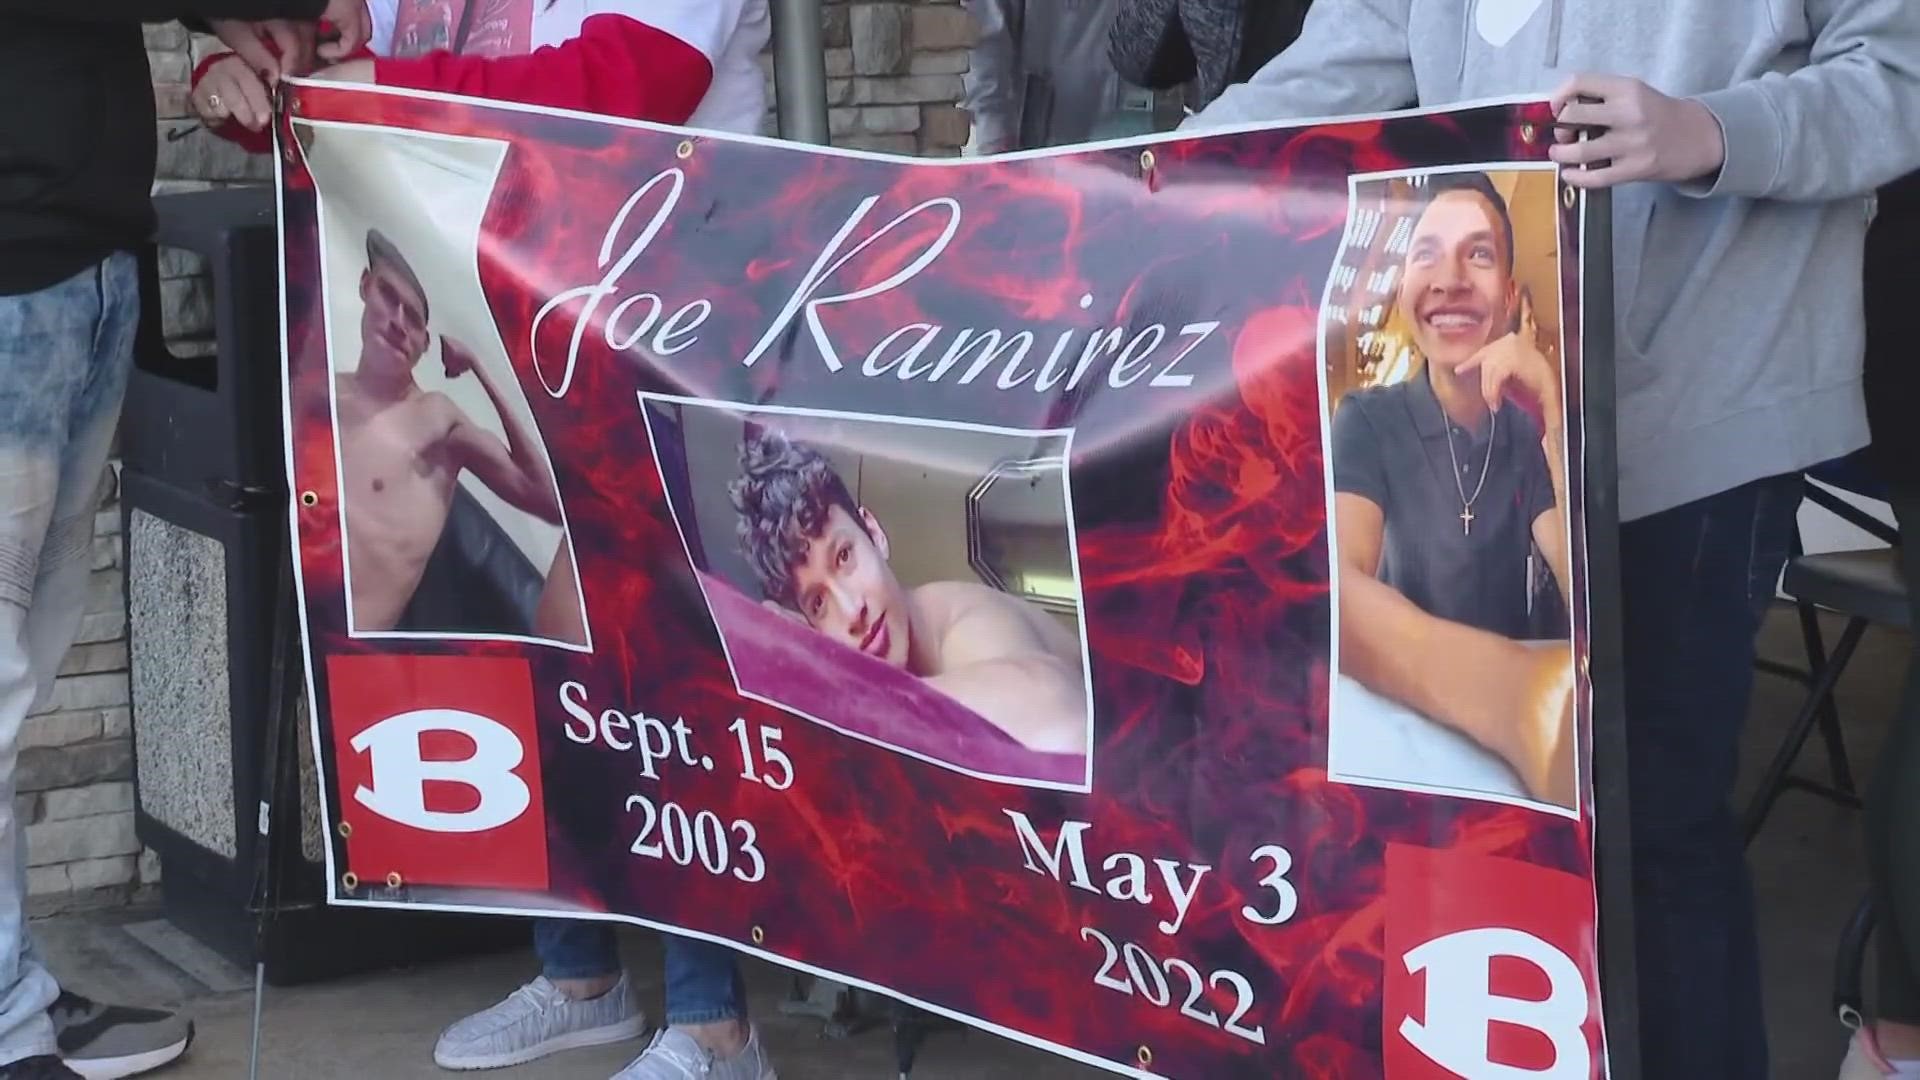 Family and friends gathered to raise money for a memorial service in honor of Ramirez's death on May 3, 2022.